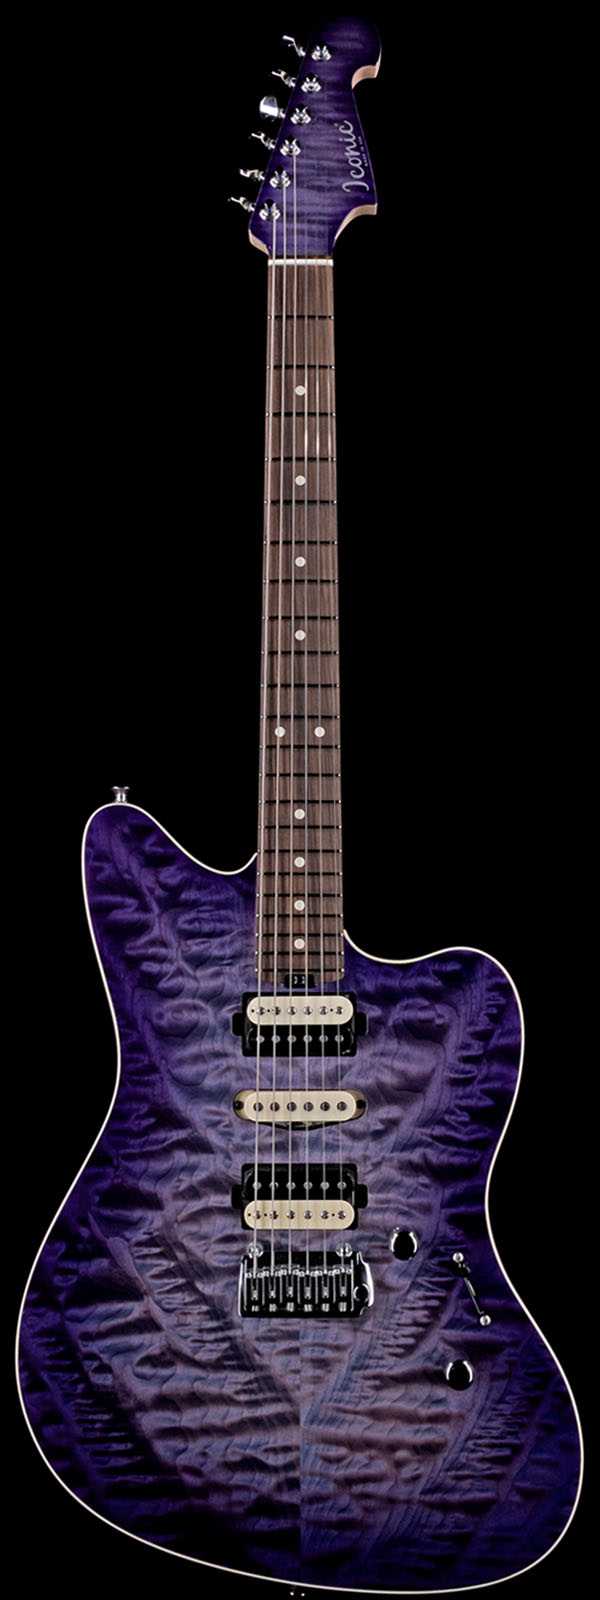 Iconic Cardiff Evo Limited 5A Quilt Top 5A Flame Neck Neck Purple Haze with Purple Sparkle Back